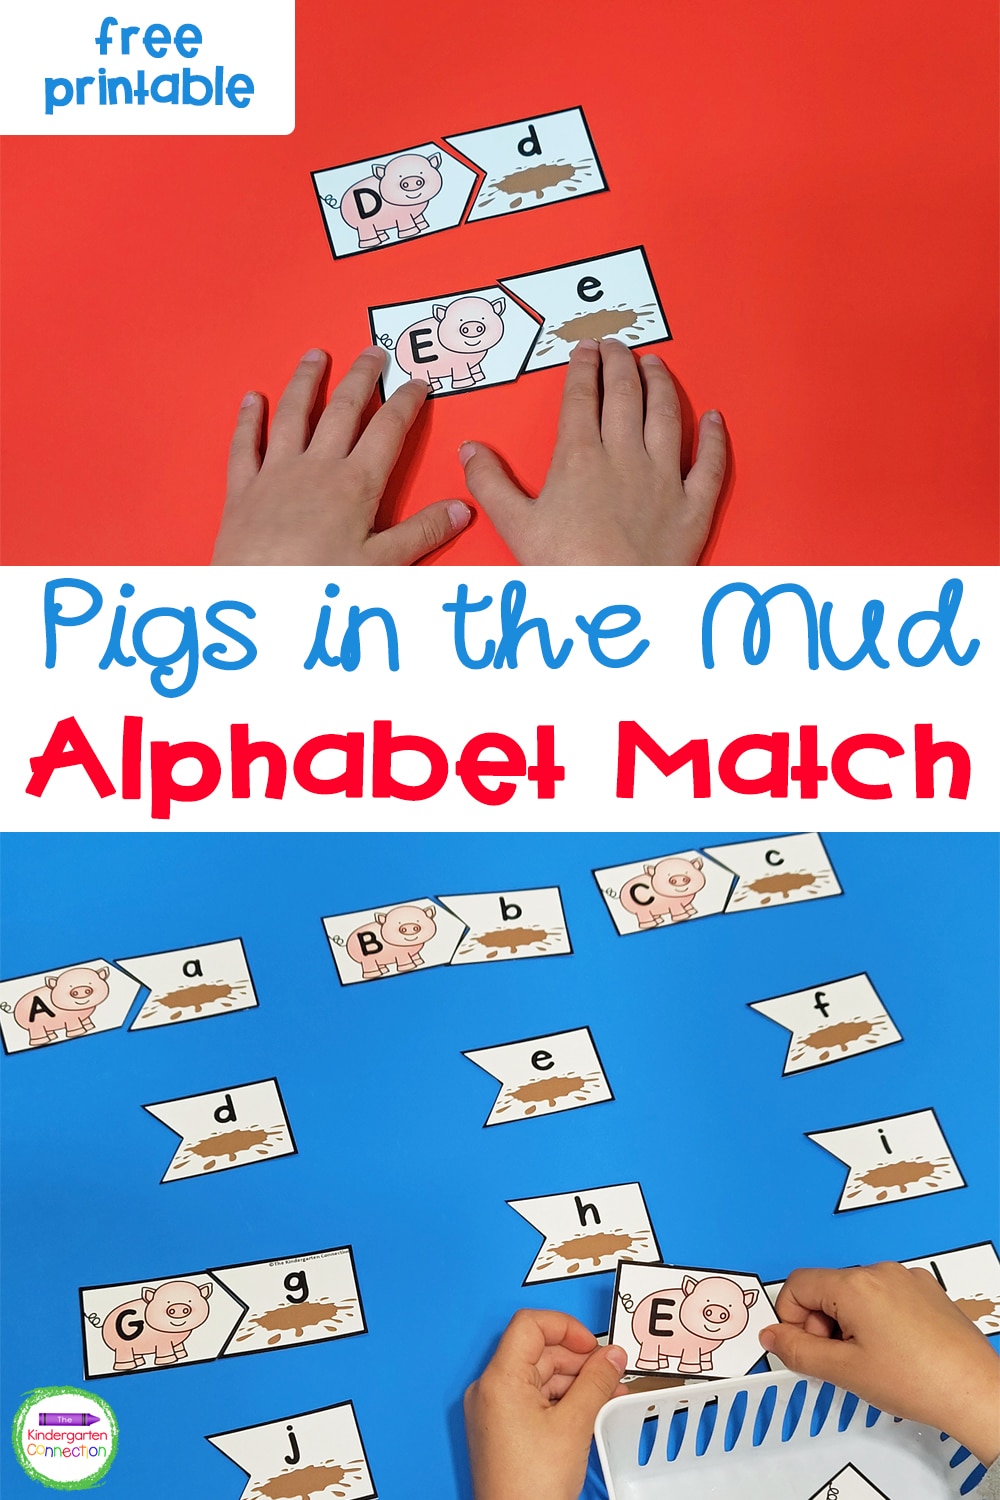 Learning the alphabet is super fun with this free Pigs in the Mud Alphabet Match! It's perfect for literacy centers or small groups!